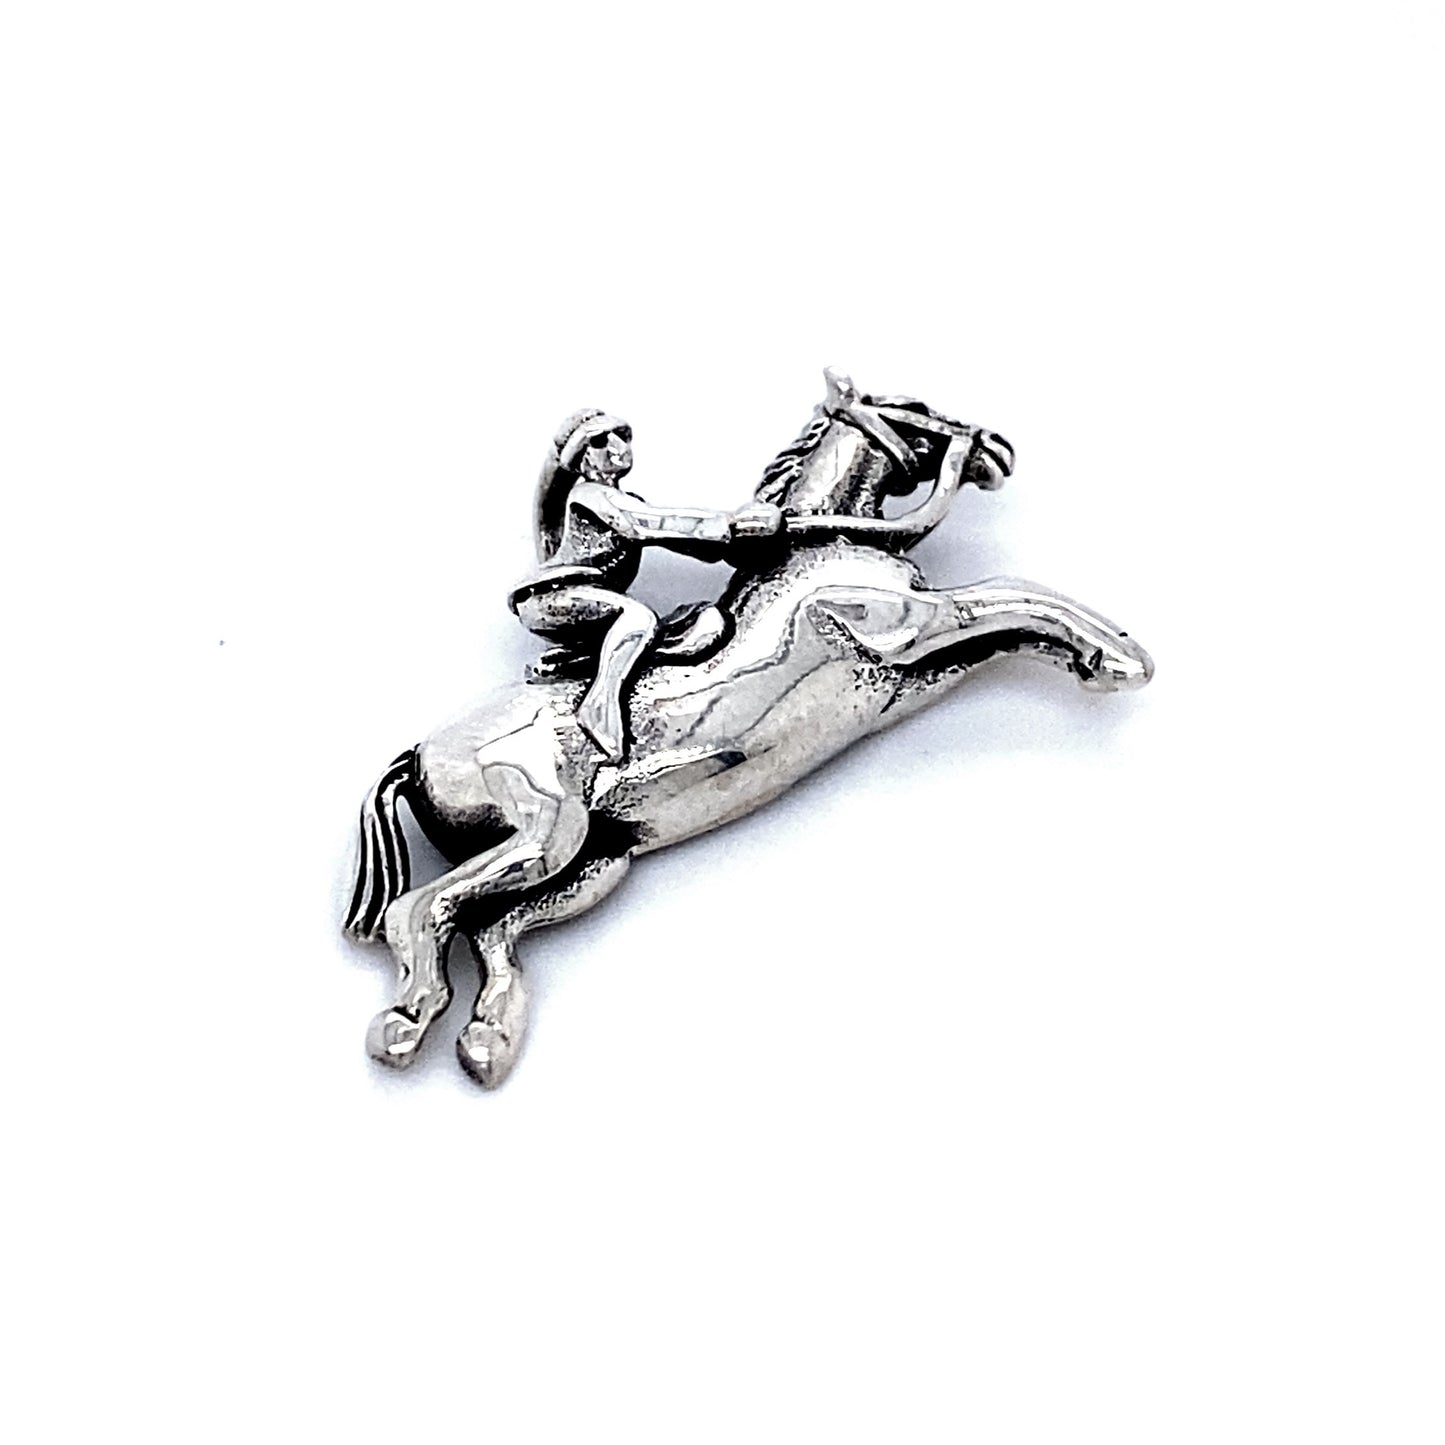 
                  
                    A Jumping Horse with Jockey Charm depicting a horse and rider in mid-jump against a plain white background, making the perfect equestrian gift.
                  
                